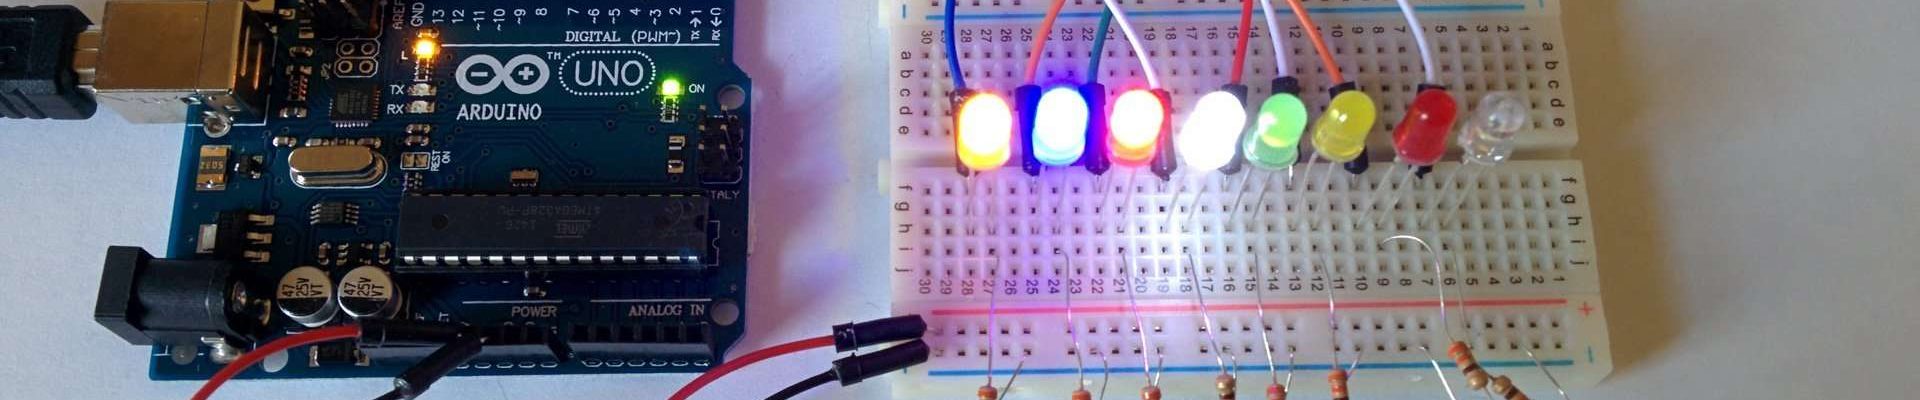 A circuit built using the Arduino platform and programmed to display lights made during Arduino camp